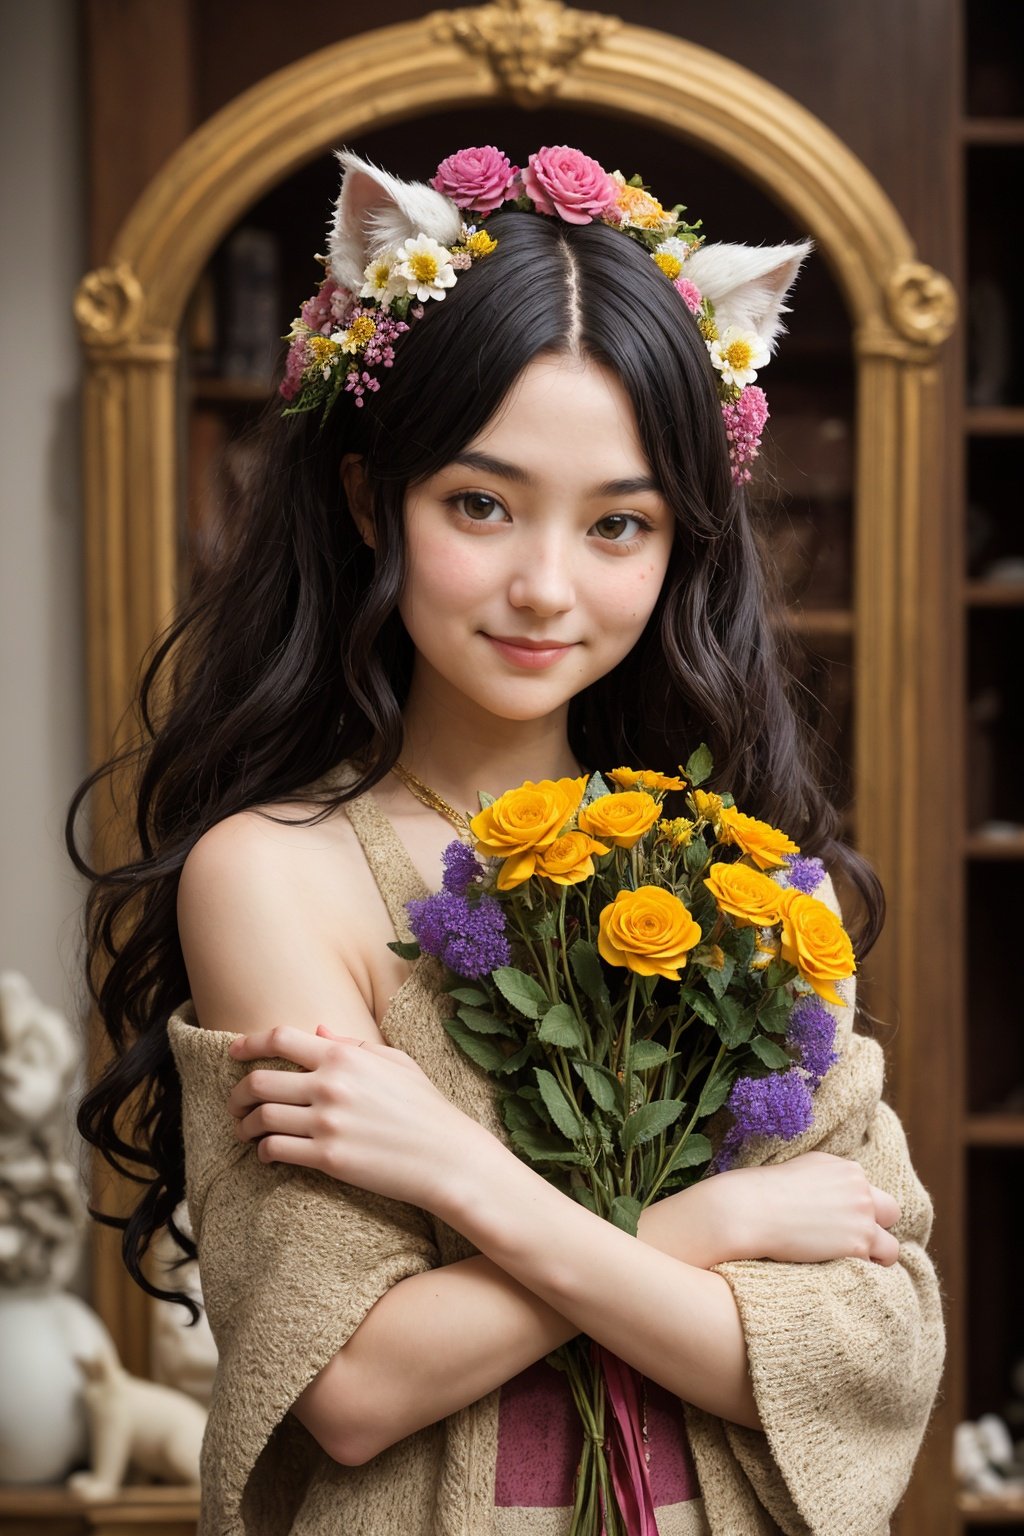 xxmixgirl,strange figurine creature made of hauyne,Xxmix_Catecat,dfdd,happy_face,long curly hair, flowers, warm colors, holding flowers in arms